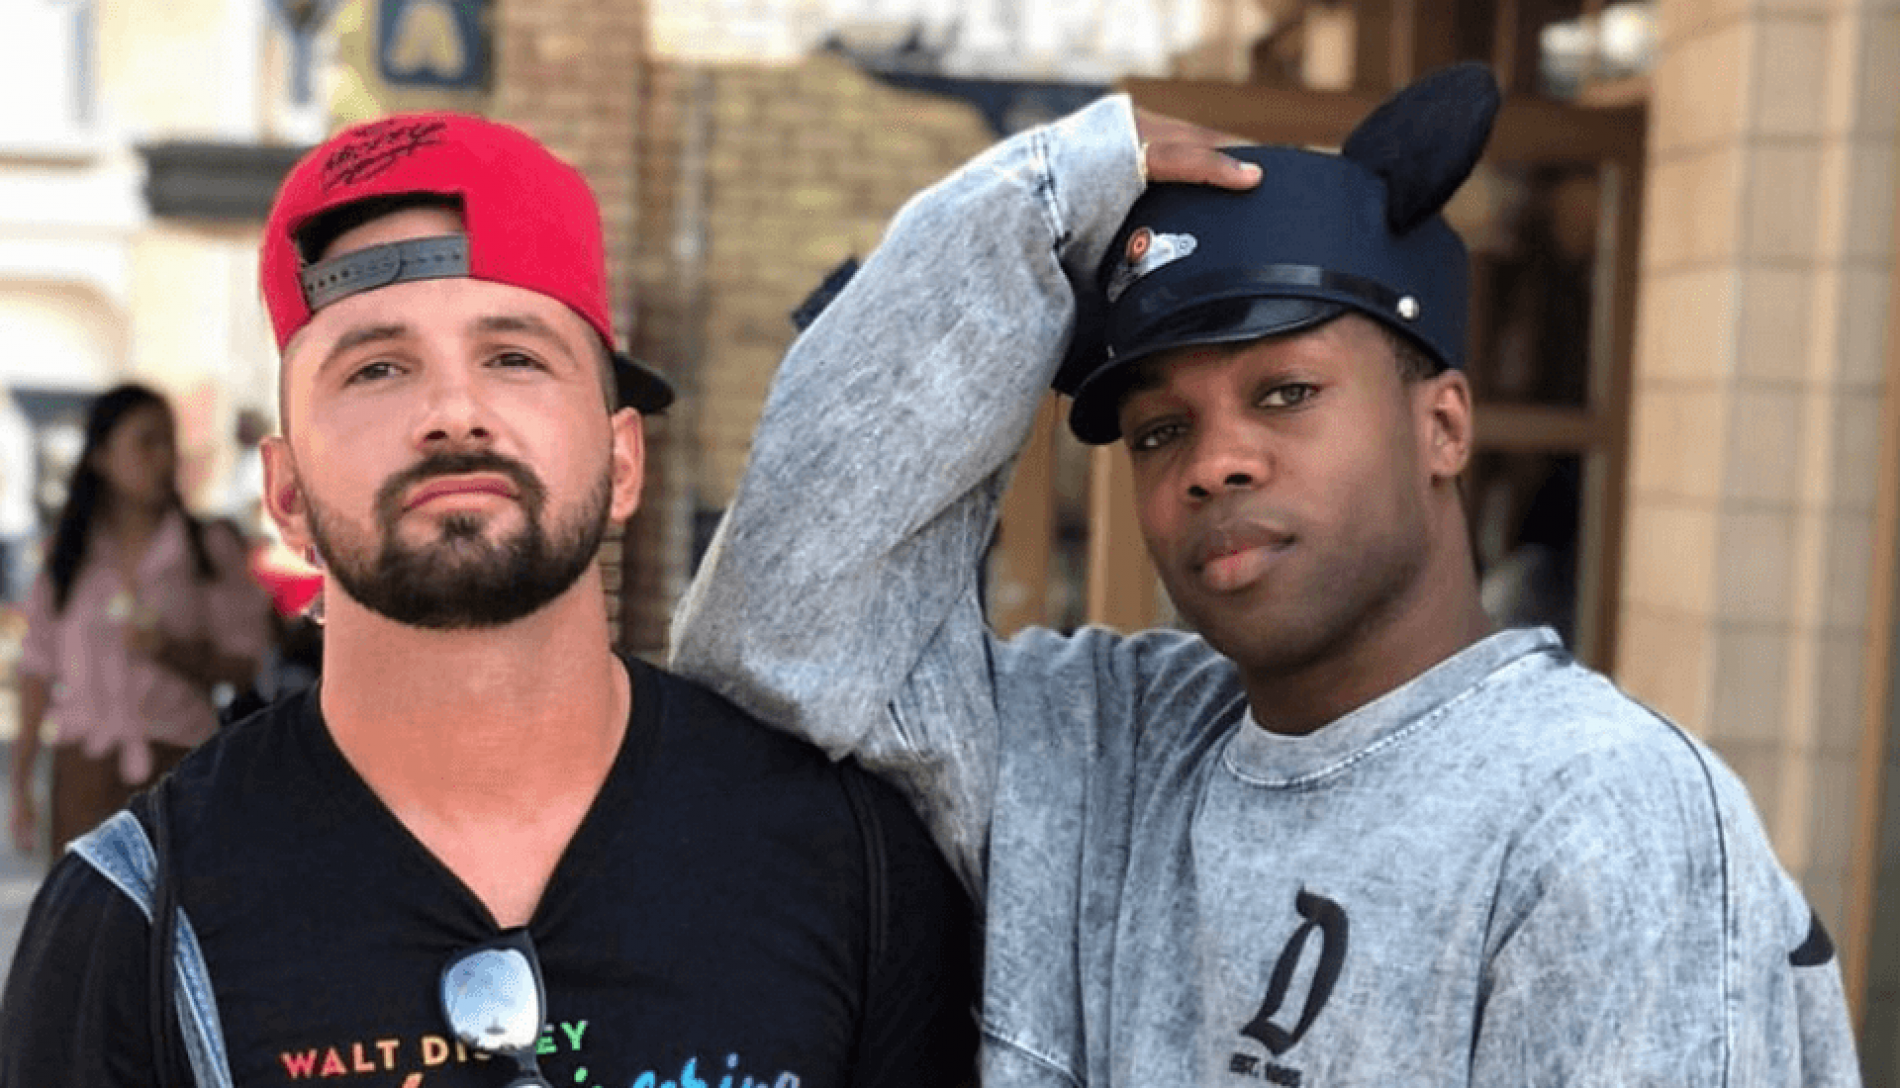 Todrick Hall’s former assistant accuses performer of abuse